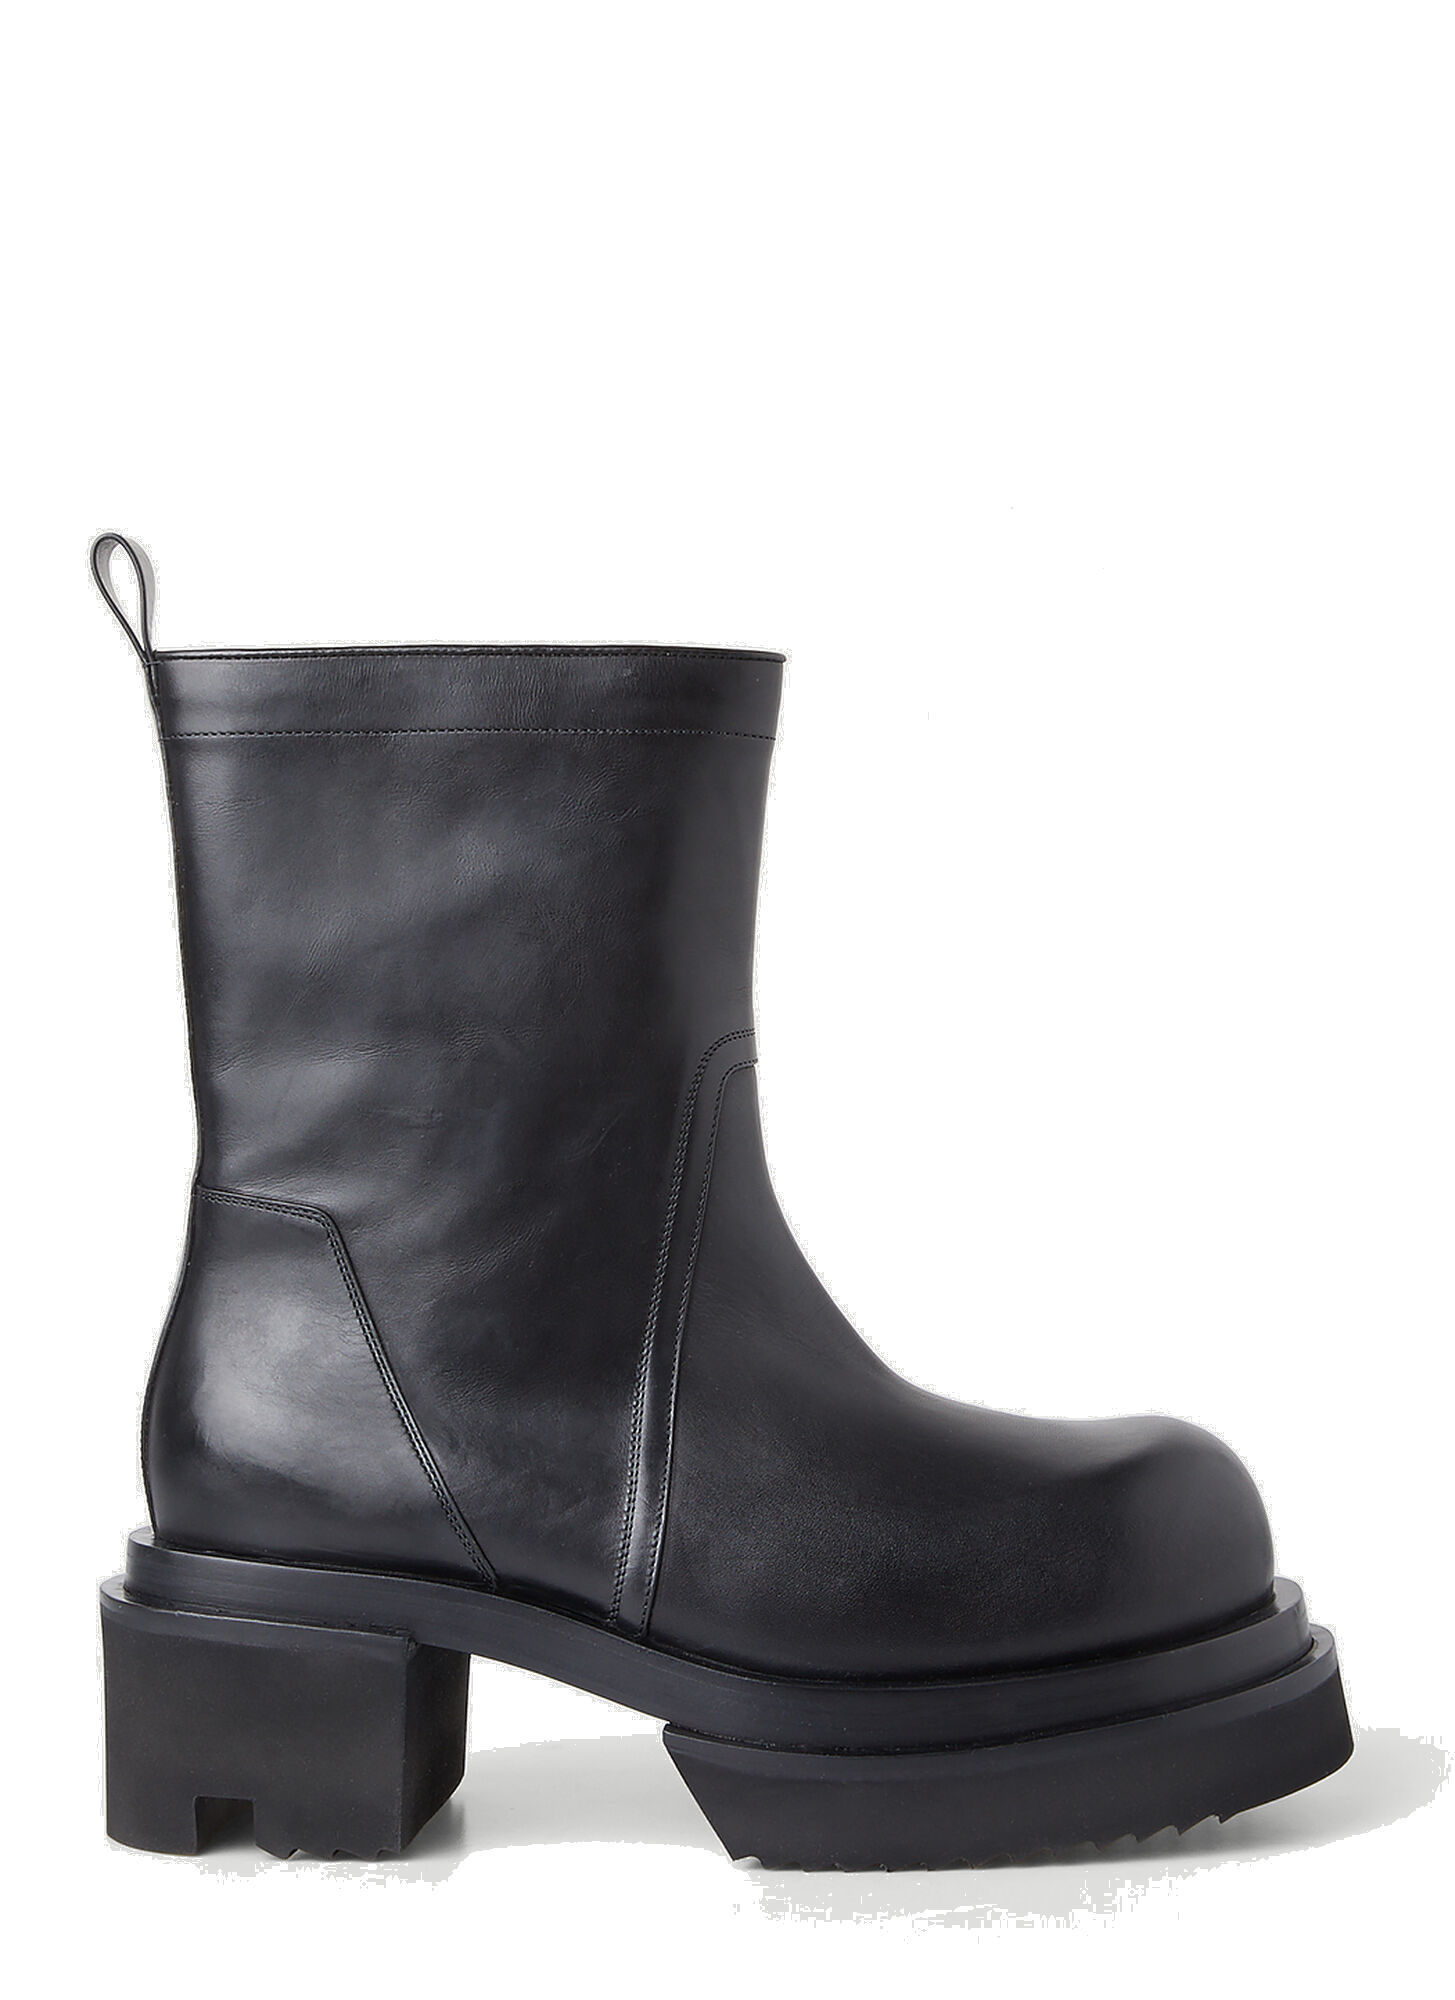 Tread Sole Leather Boots in Black Rick Owens